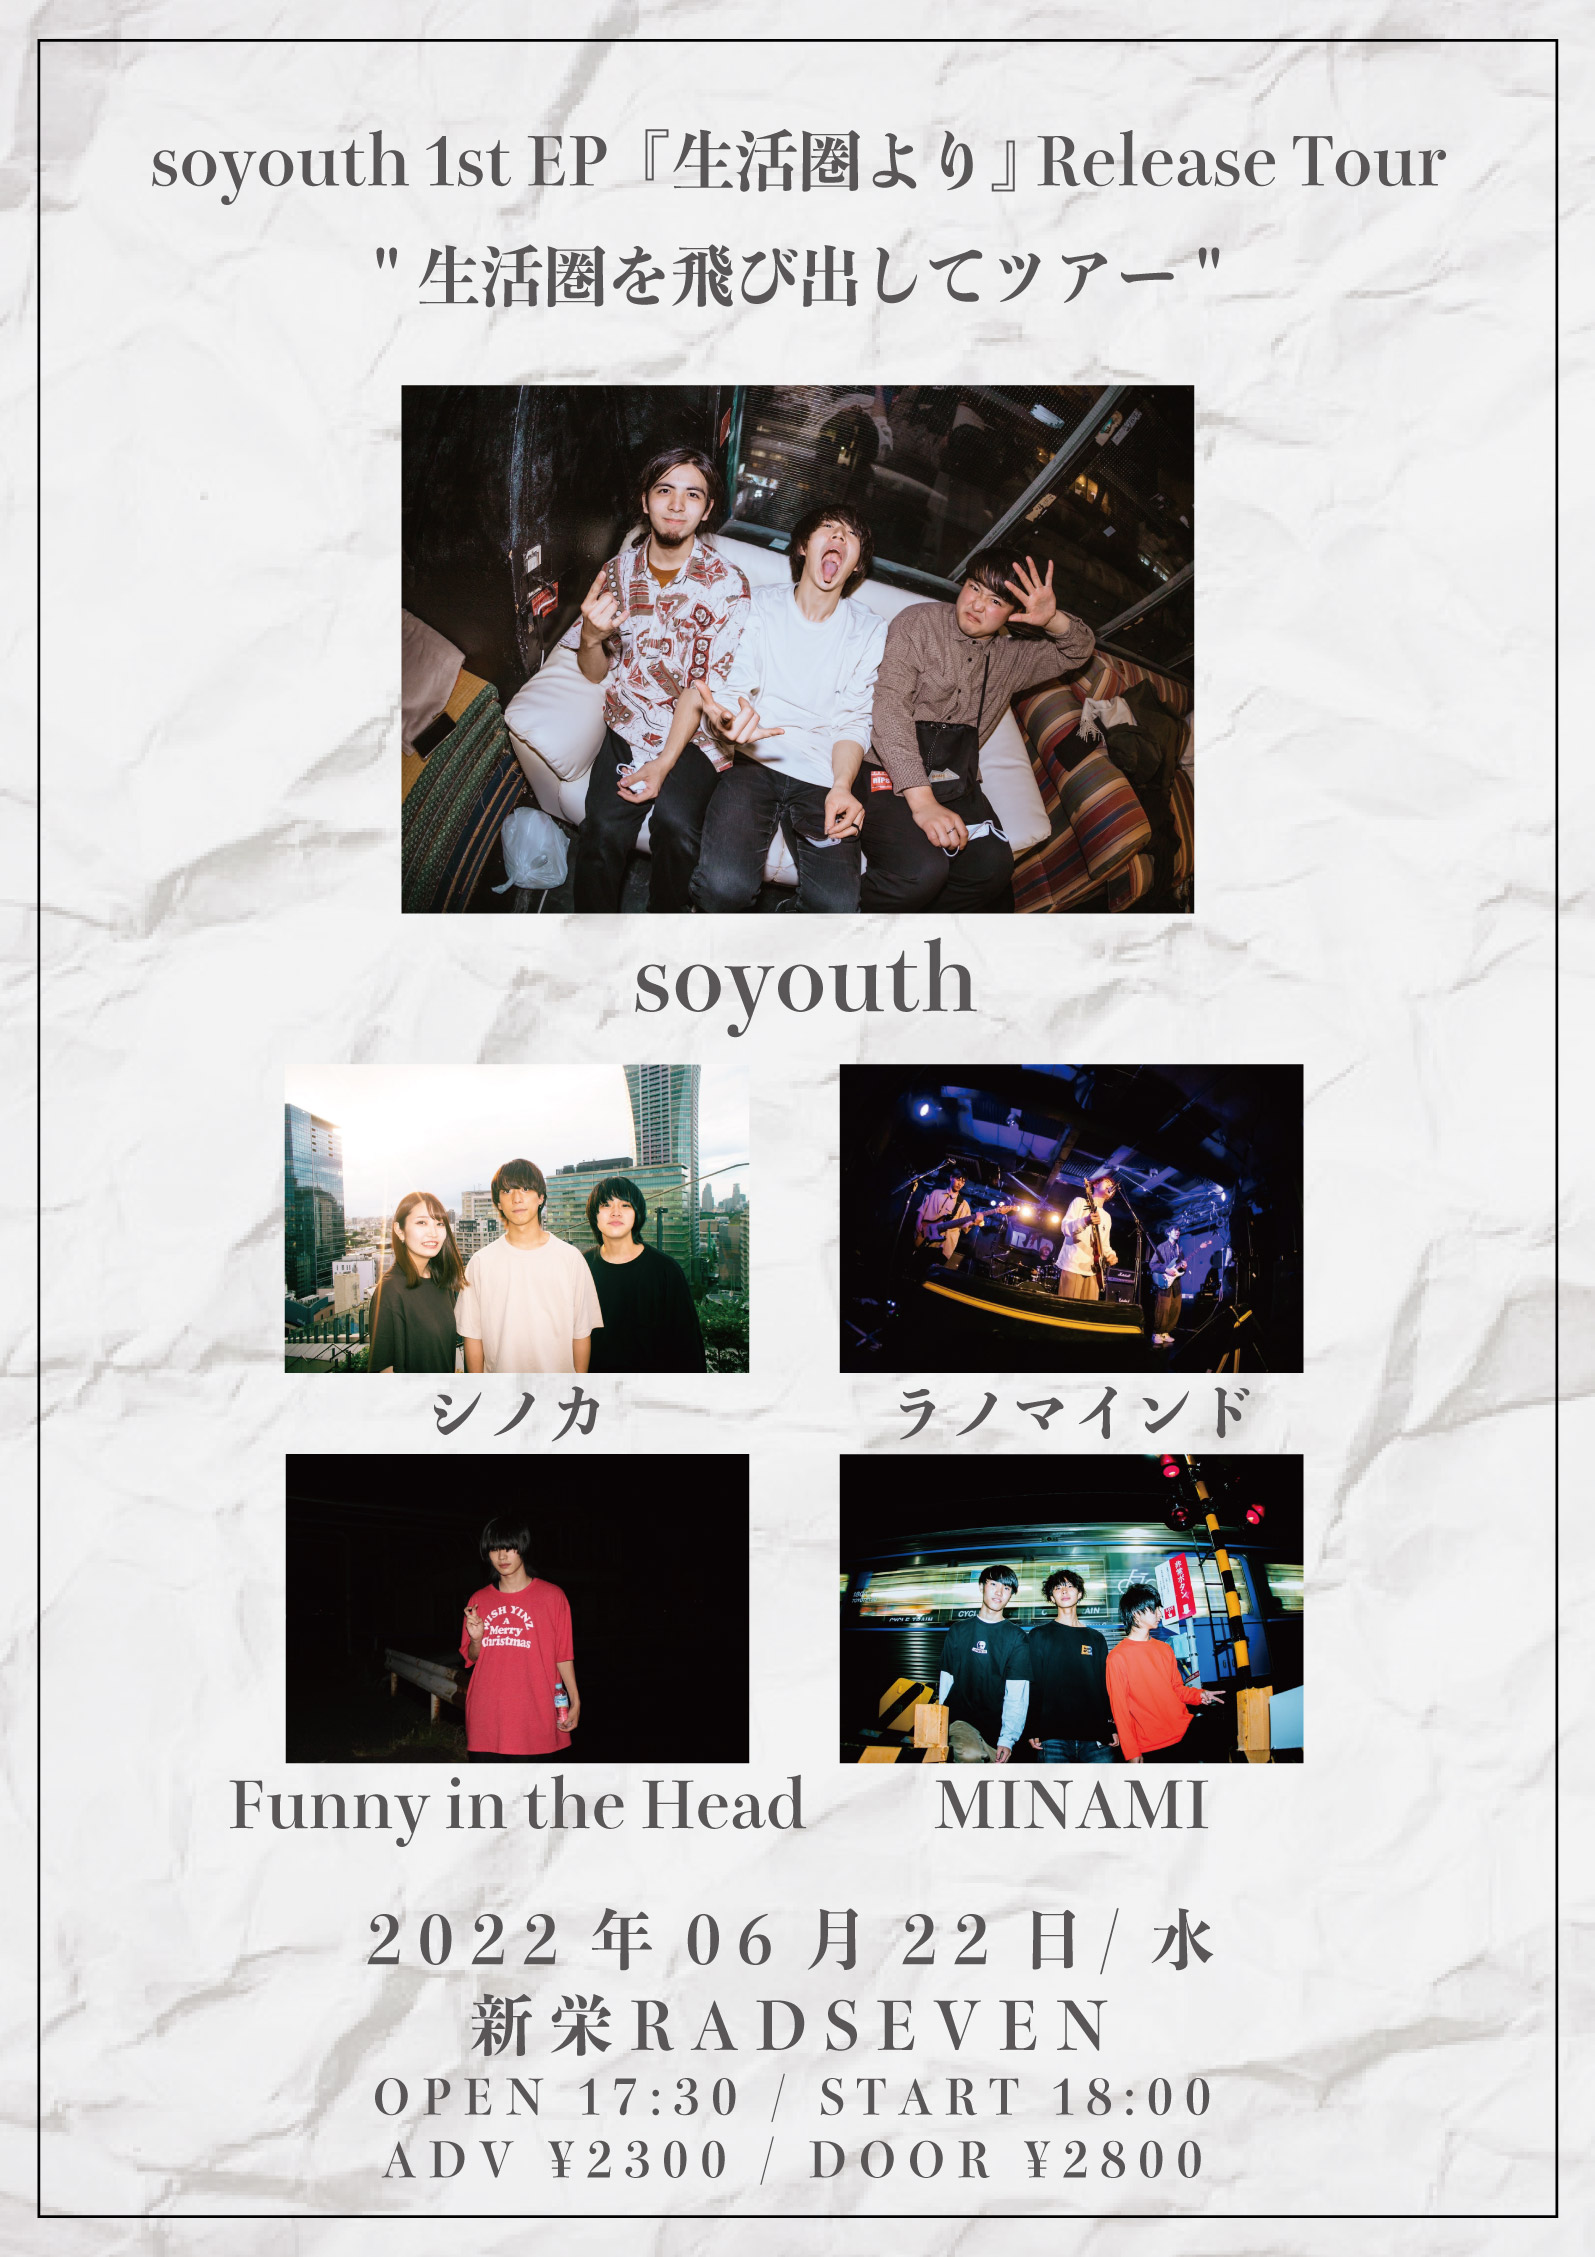 soyouth 1st EP『生活圏より』 Release Tour "生活圏を飛び出してツアー"